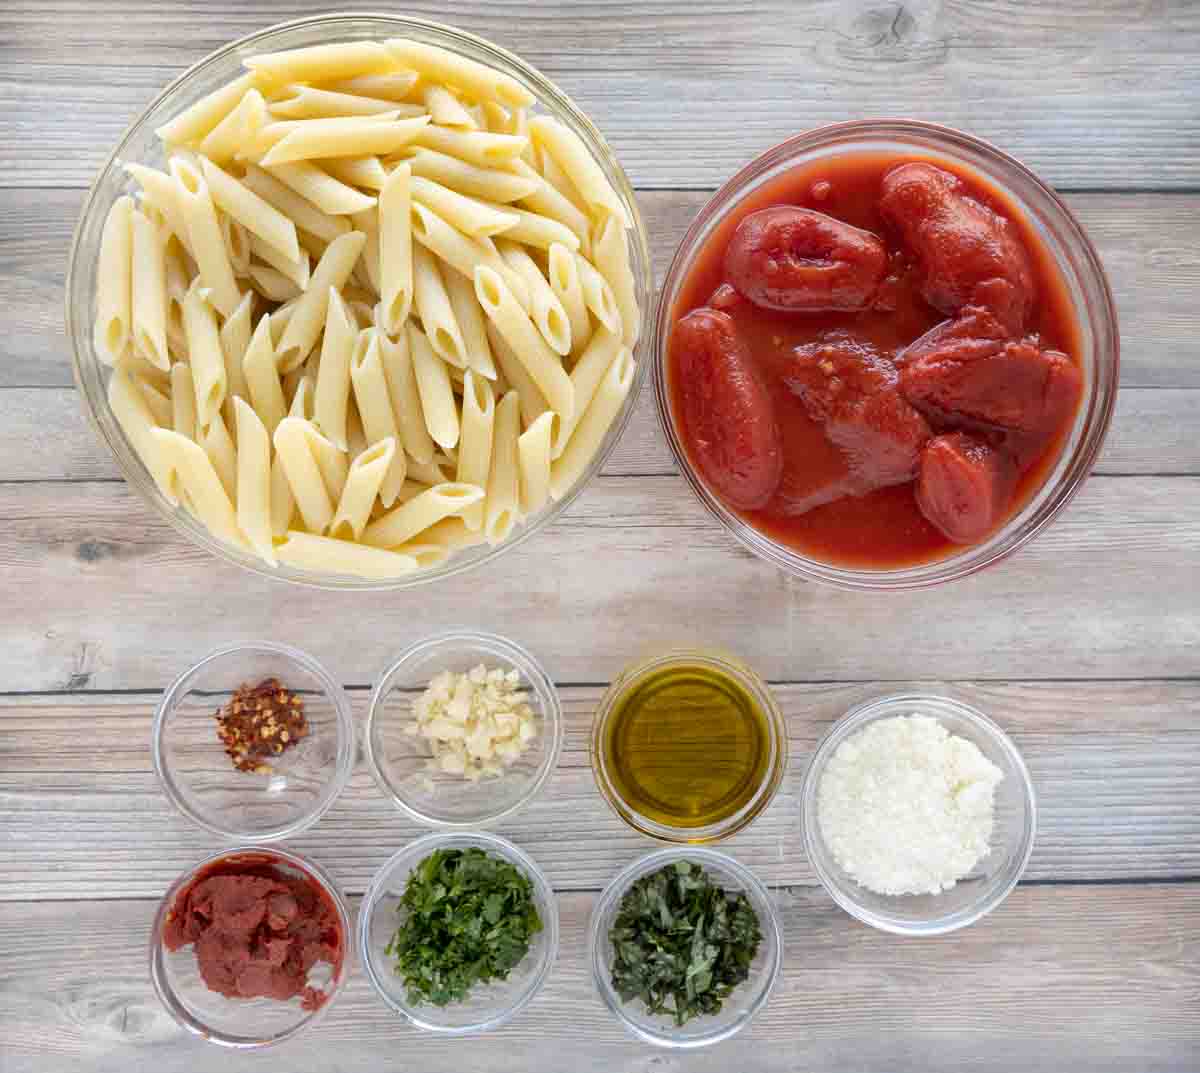 Ingredients to make Arrabbiata Sauce with Penne